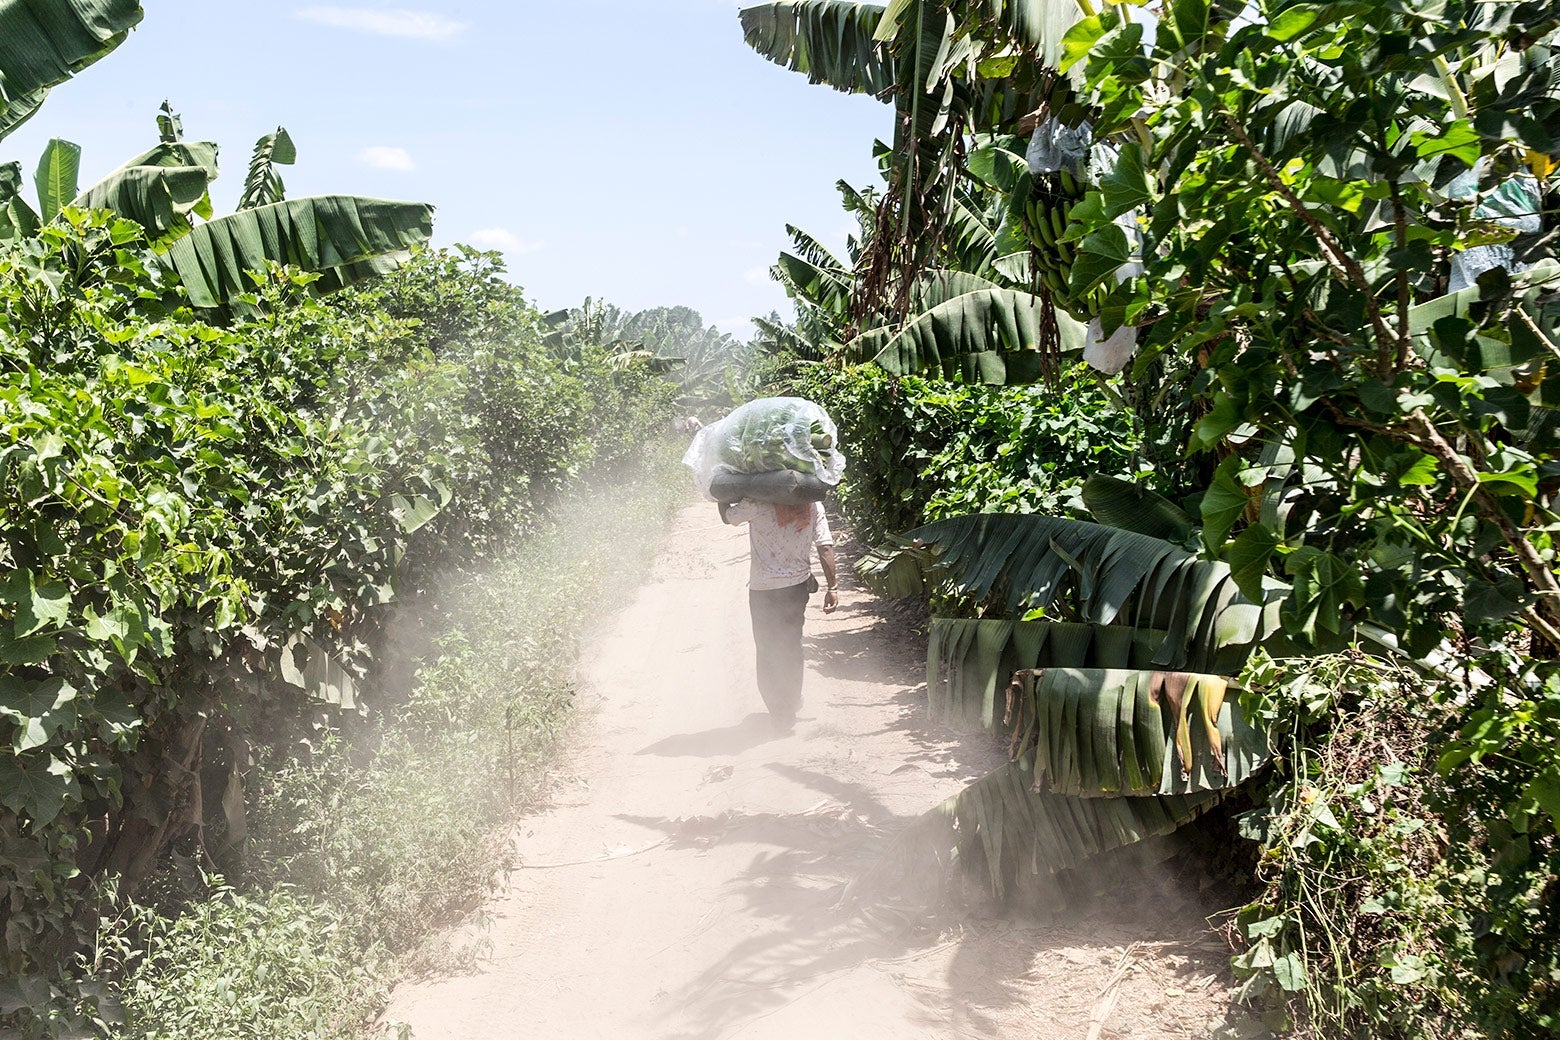 A worker carrying a big banana plant on his shoulder while walking along a farm track